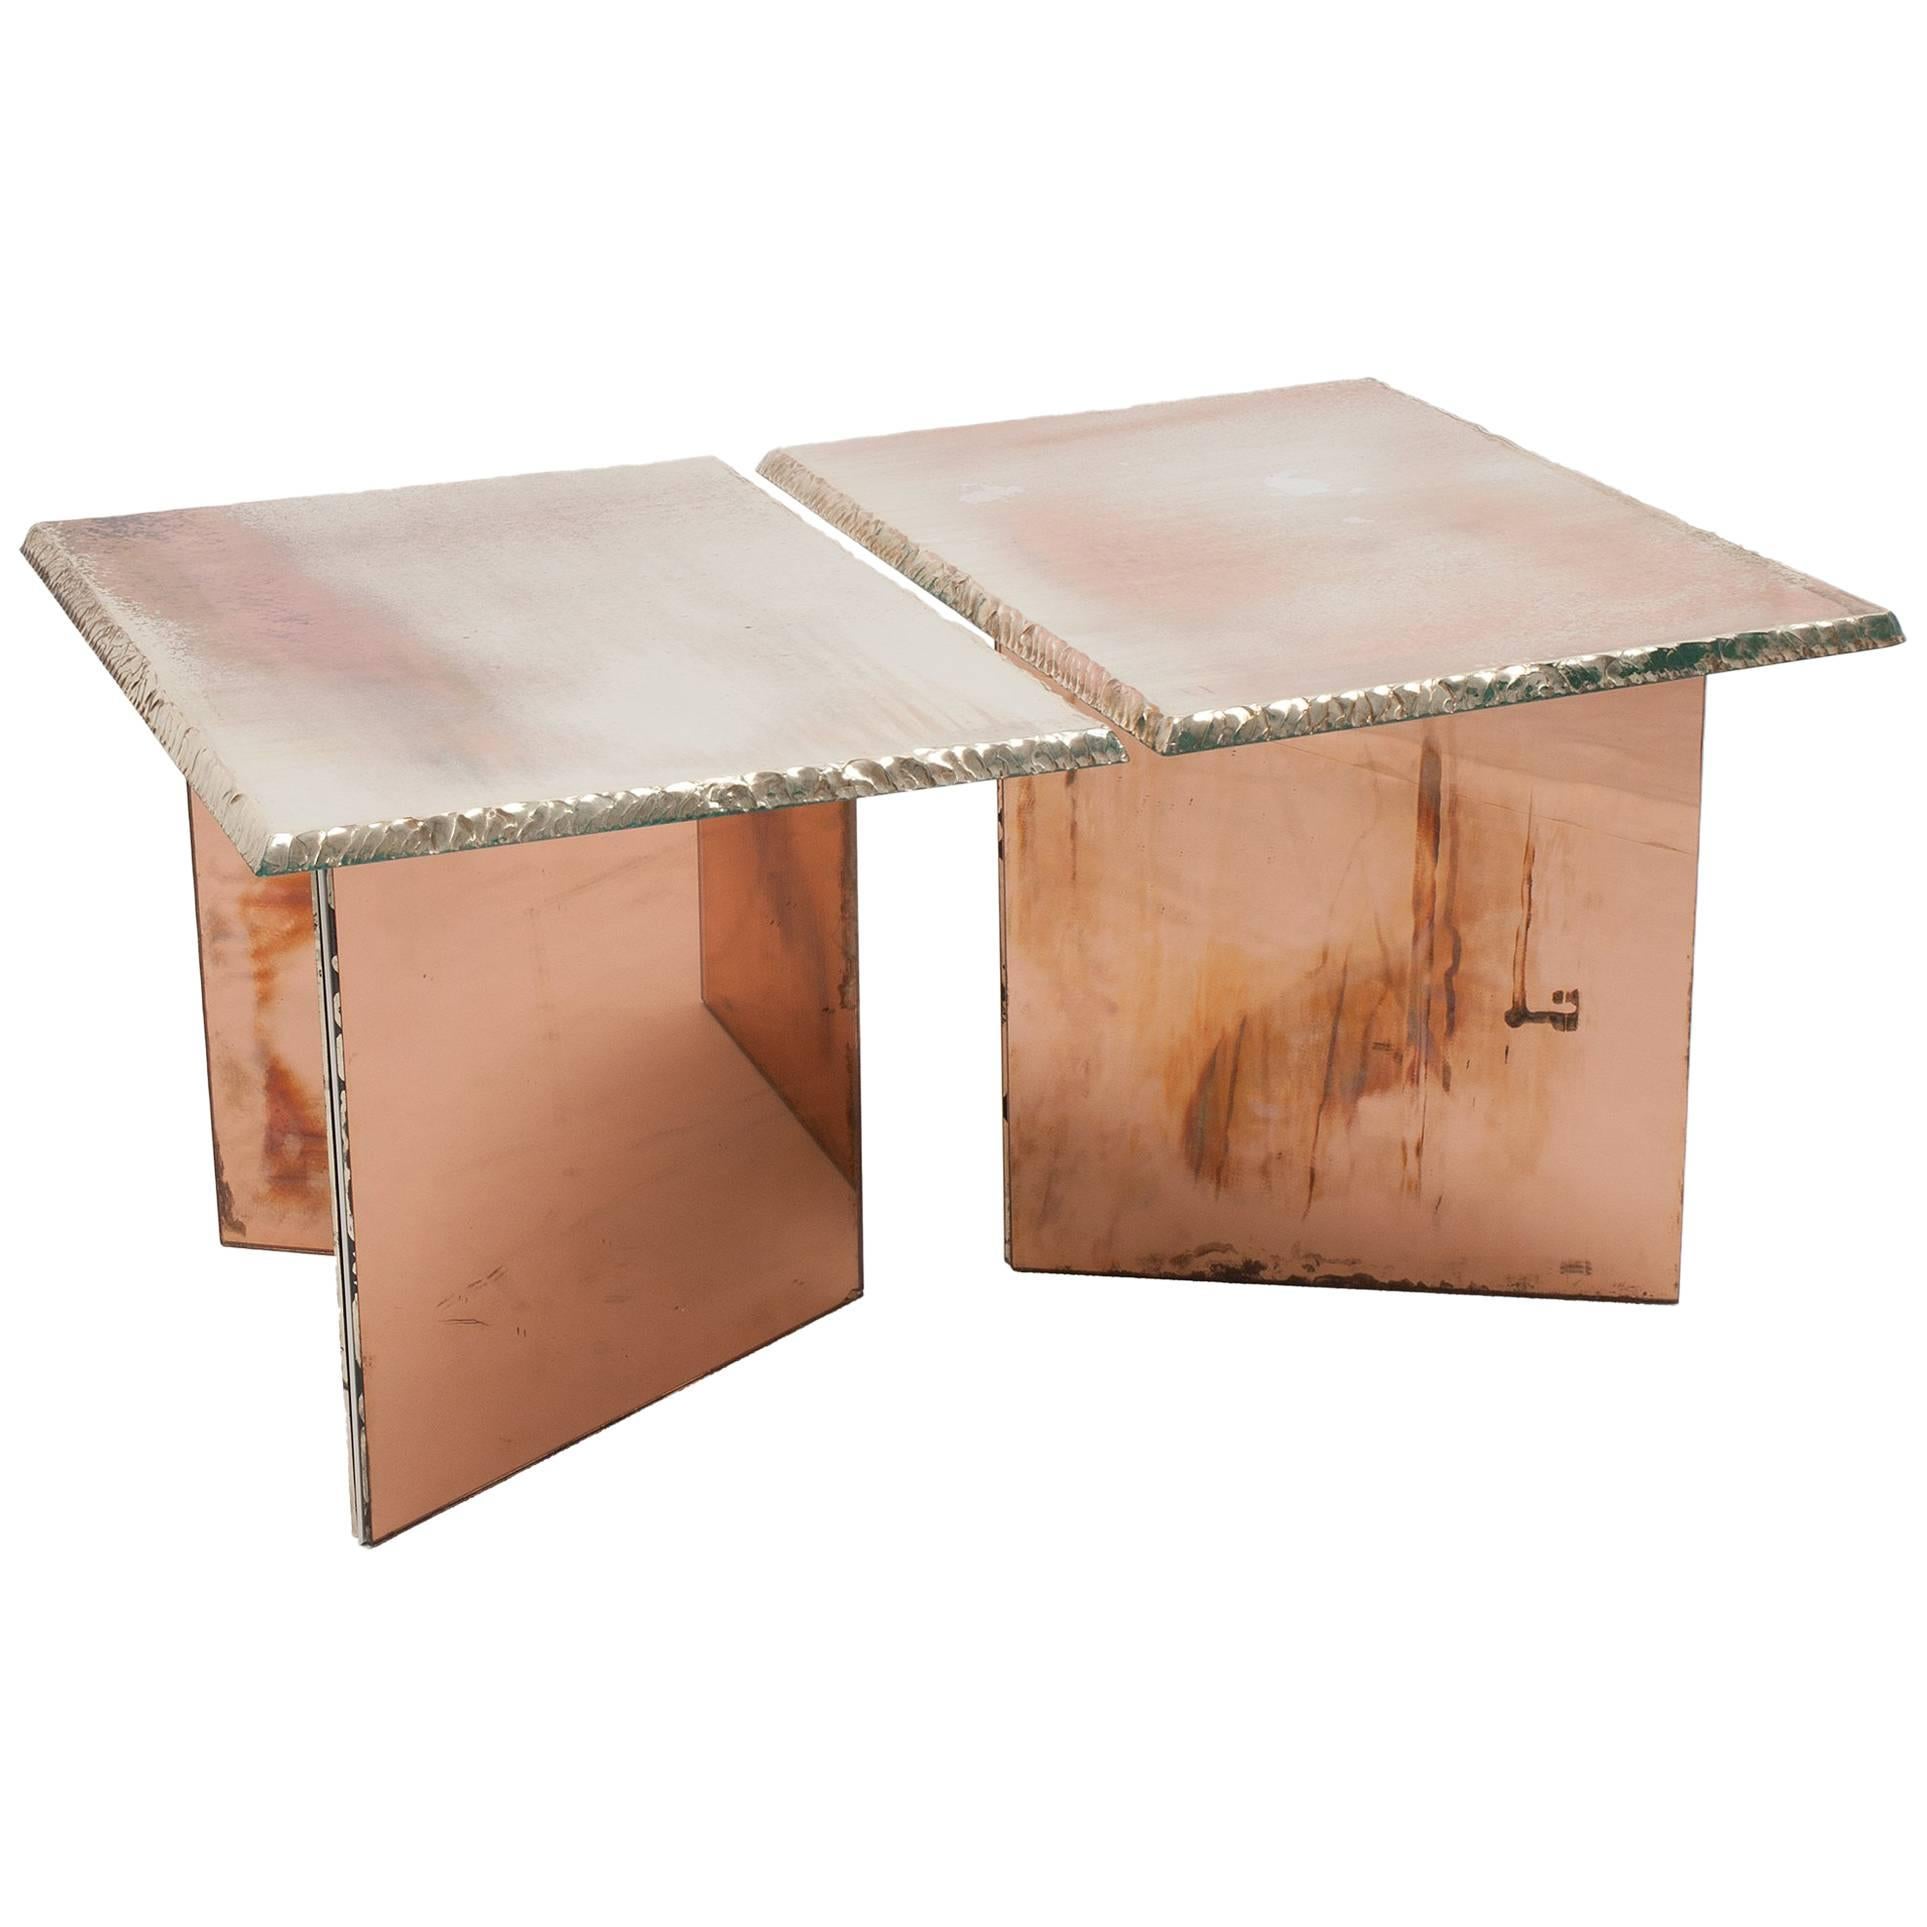 Flight contemporary Coffee-low Table, 70x50cm, rose glass base, Silvered Glass